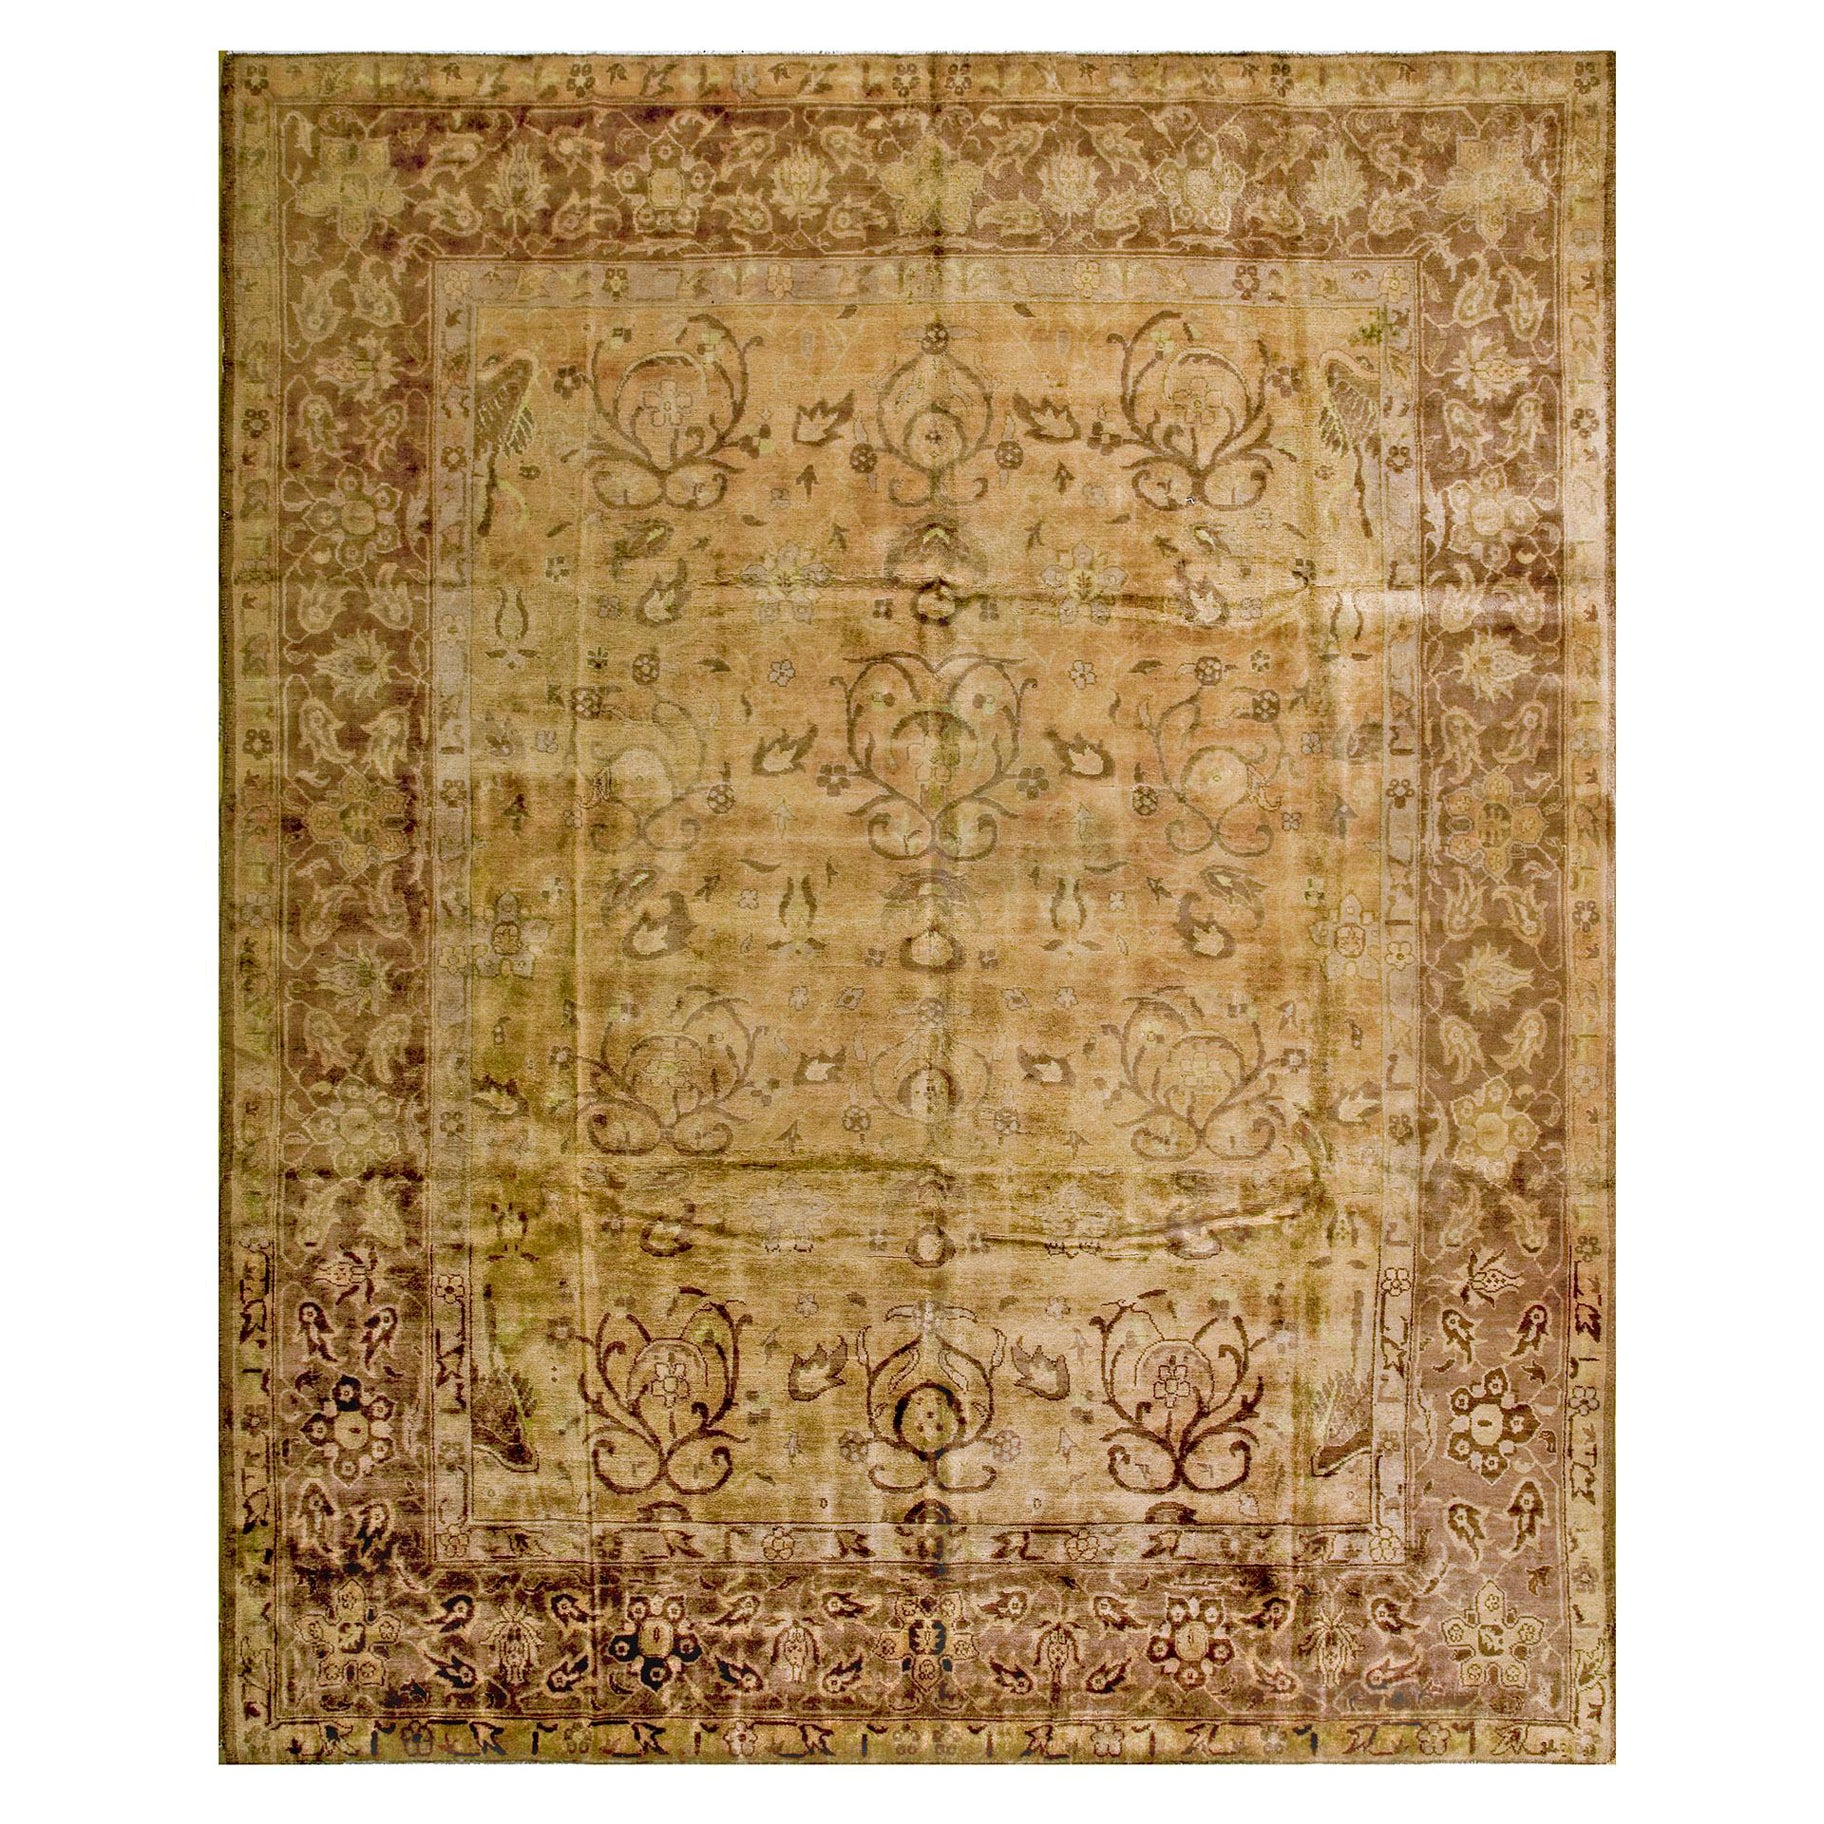 Antique Indian Rug 9' 3" x 11' 7" For Sale